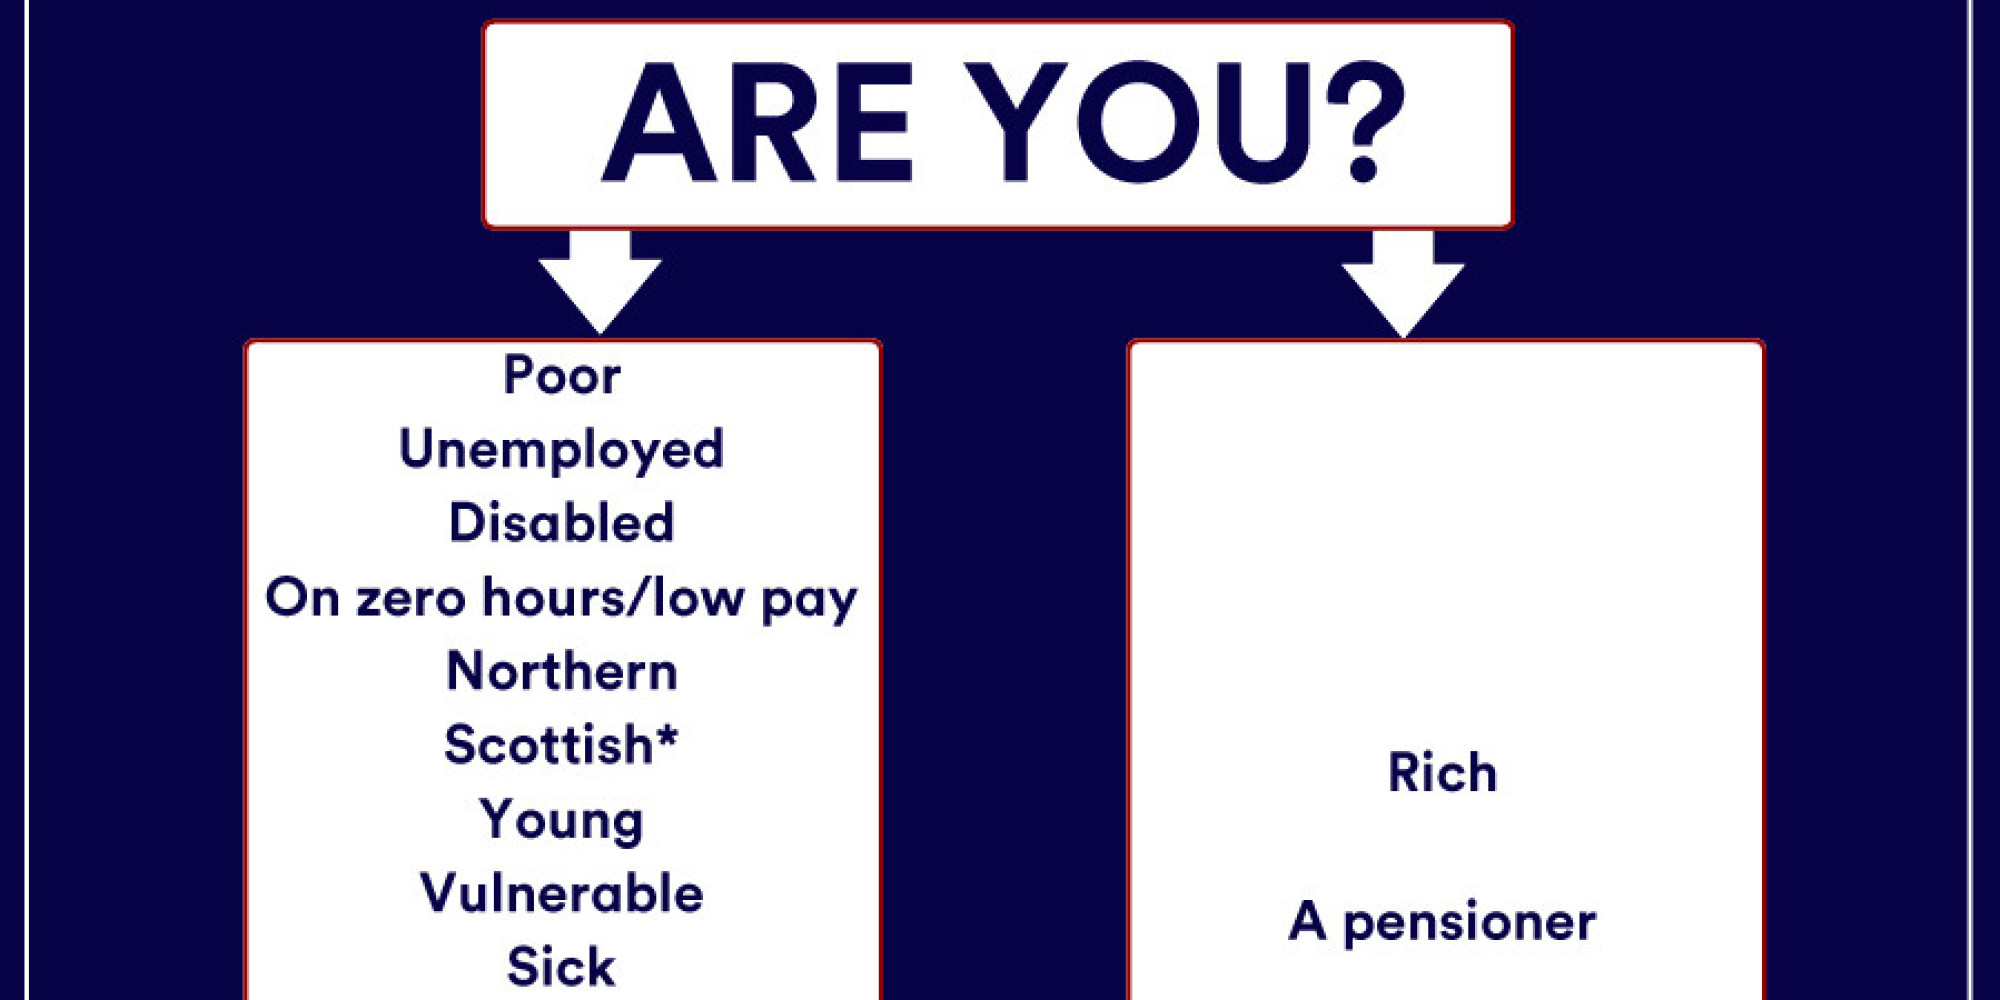 How Does Tory Party Policy Affect You? Use Our Flowchart | HuffPost UK